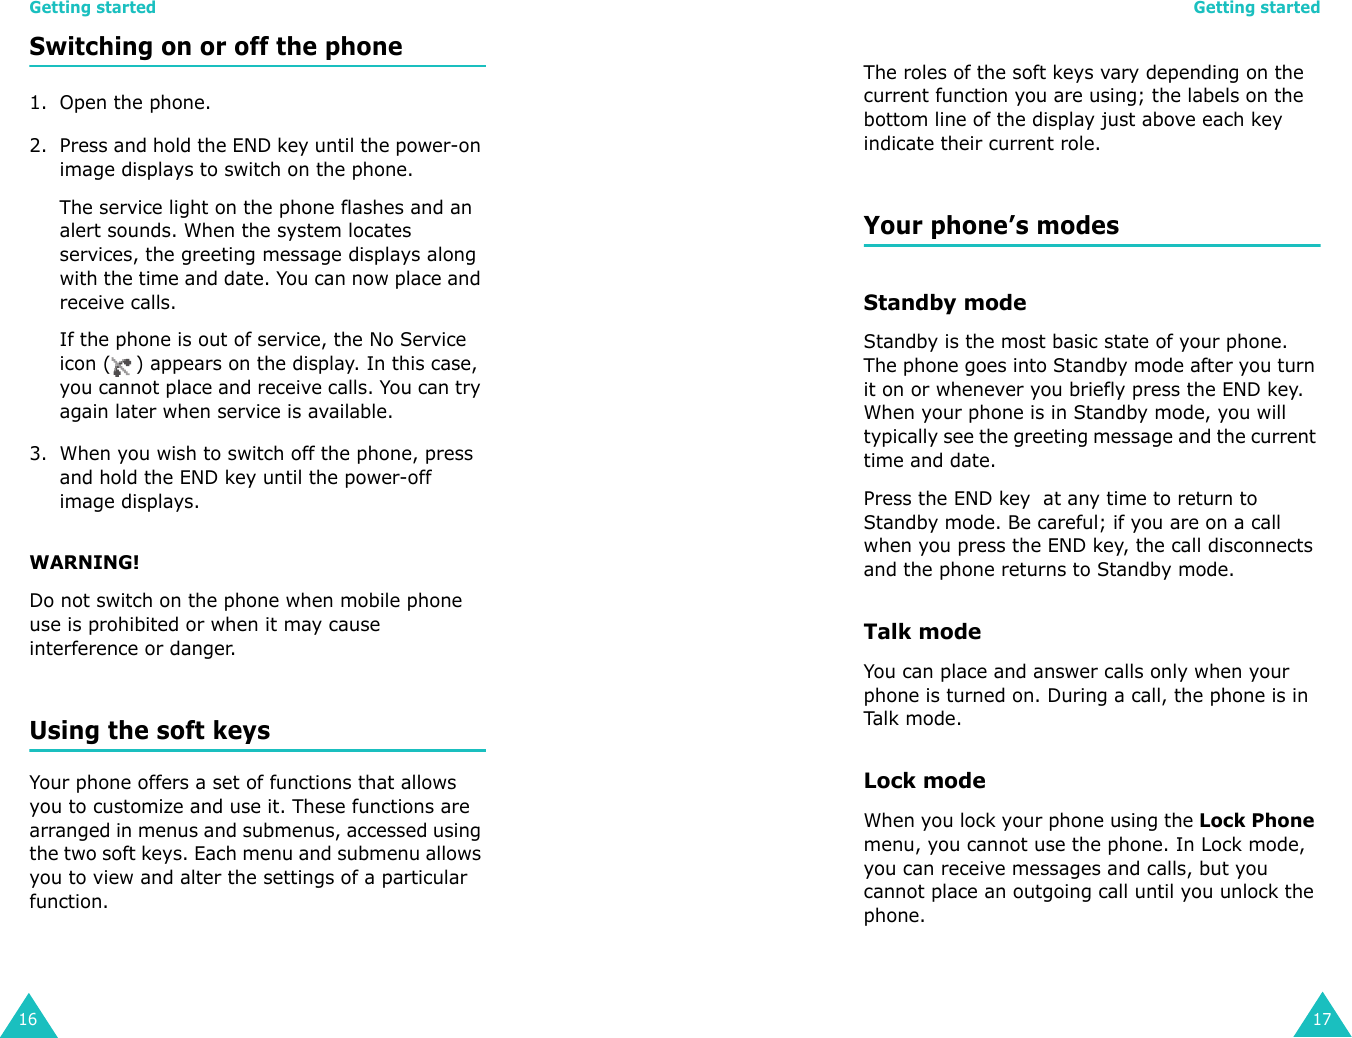 Getting started16Switching on or off the phone 1. Open the phone.2. Press and hold the END key until the power-on image displays to switch on the phone.The service light on the phone flashes and an alert sounds. When the system locates services, the greeting message displays along with the time and date. You can now place and receive calls.If the phone is out of service, the No Service icon ( ) appears on the display. In this case, you cannot place and receive calls. You can try again later when service is available.3. When you wish to switch off the phone, press and hold the END key until the power-off image displays.WARNING!Do not switch on the phone when mobile phone use is prohibited or when it may cause interference or danger.Using the soft keysYour phone offers a set of functions that allows you to customize and use it. These functions are arranged in menus and submenus, accessed using the two soft keys. Each menu and submenu allows you to view and alter the settings of a particular function.Getting started17The roles of the soft keys vary depending on the current function you are using; the labels on the bottom line of the display just above each key indicate their current role.Your phone’s modesStandby modeStandby is the most basic state of your phone. The phone goes into Standby mode after you turn it on or whenever you briefly press the END key. When your phone is in Standby mode, you will typically see the greeting message and the current time and date. Press the END key  at any time to return to Standby mode. Be careful; if you are on a call when you press the END key, the call disconnects and the phone returns to Standby mode. Talk modeYou can place and answer calls only when your phone is turned on. During a call, the phone is in Tal k mode.Lock modeWhen you lock your phone using the Lock Phone menu, you cannot use the phone. In Lock mode, you can receive messages and calls, but you cannot place an outgoing call until you unlock the phone. 